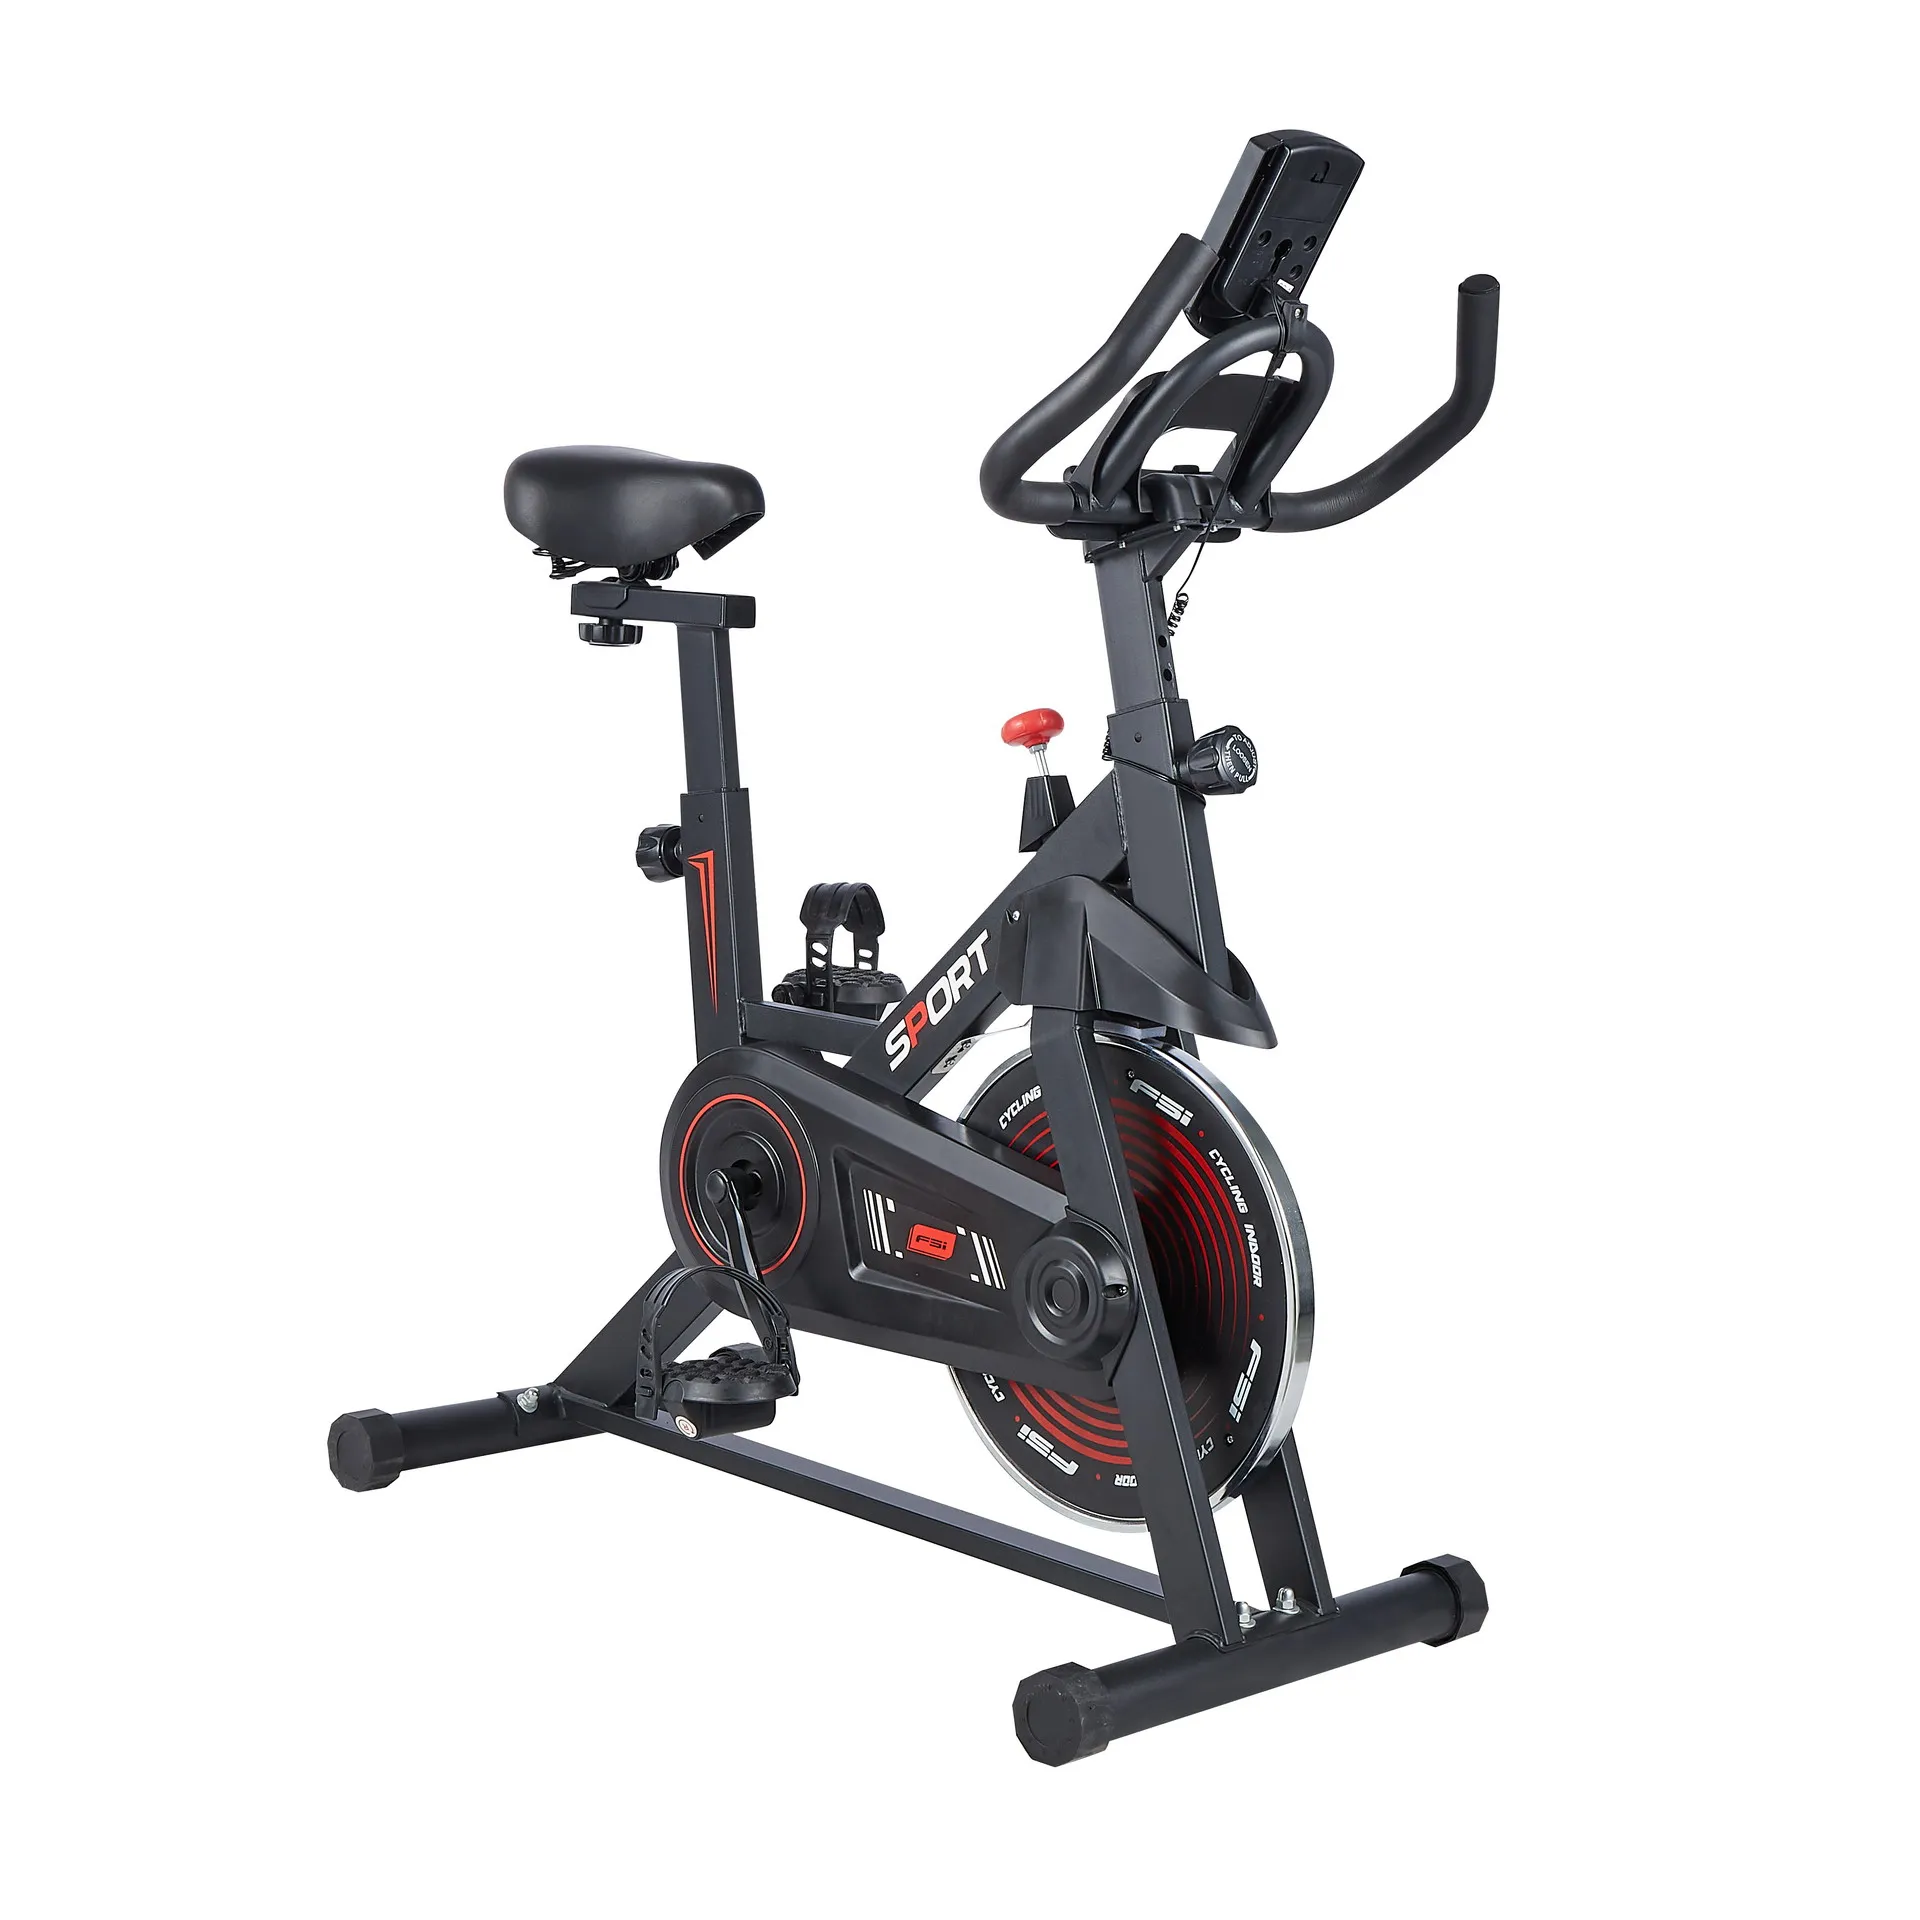 High Quality Stationary Home Fitness Bike Weight Loss Spinning Bike Indoor Cycling Exercise Bicycle